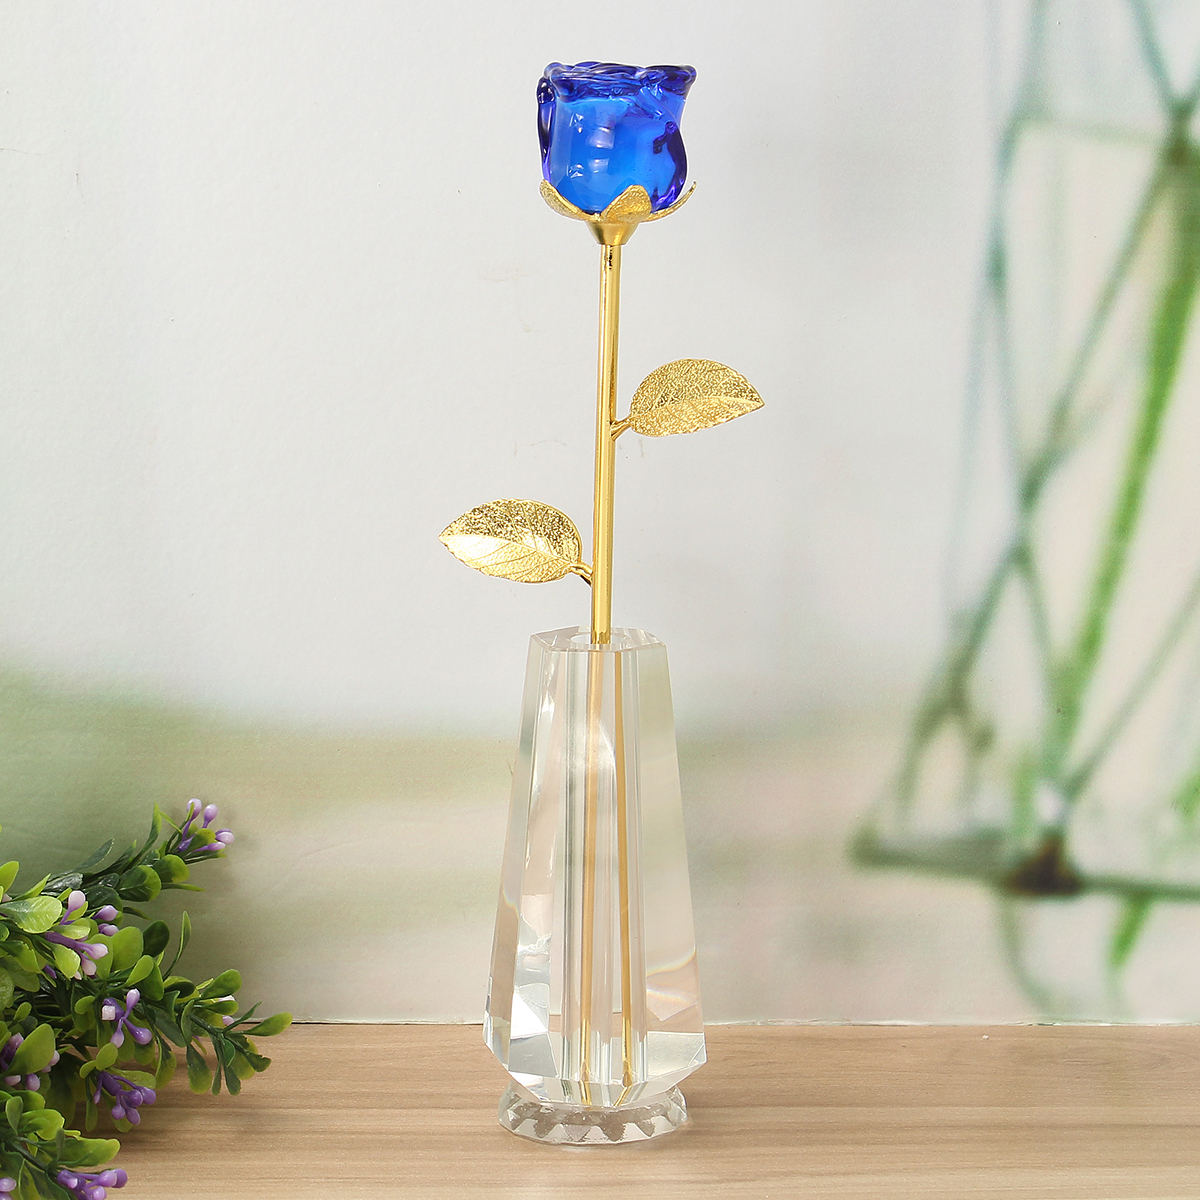 Crystal-Glass-Golden-Roses-Flower-Ornament-Valentine-Gifts-Present-with-Box-Home-Decorations-1430314-7